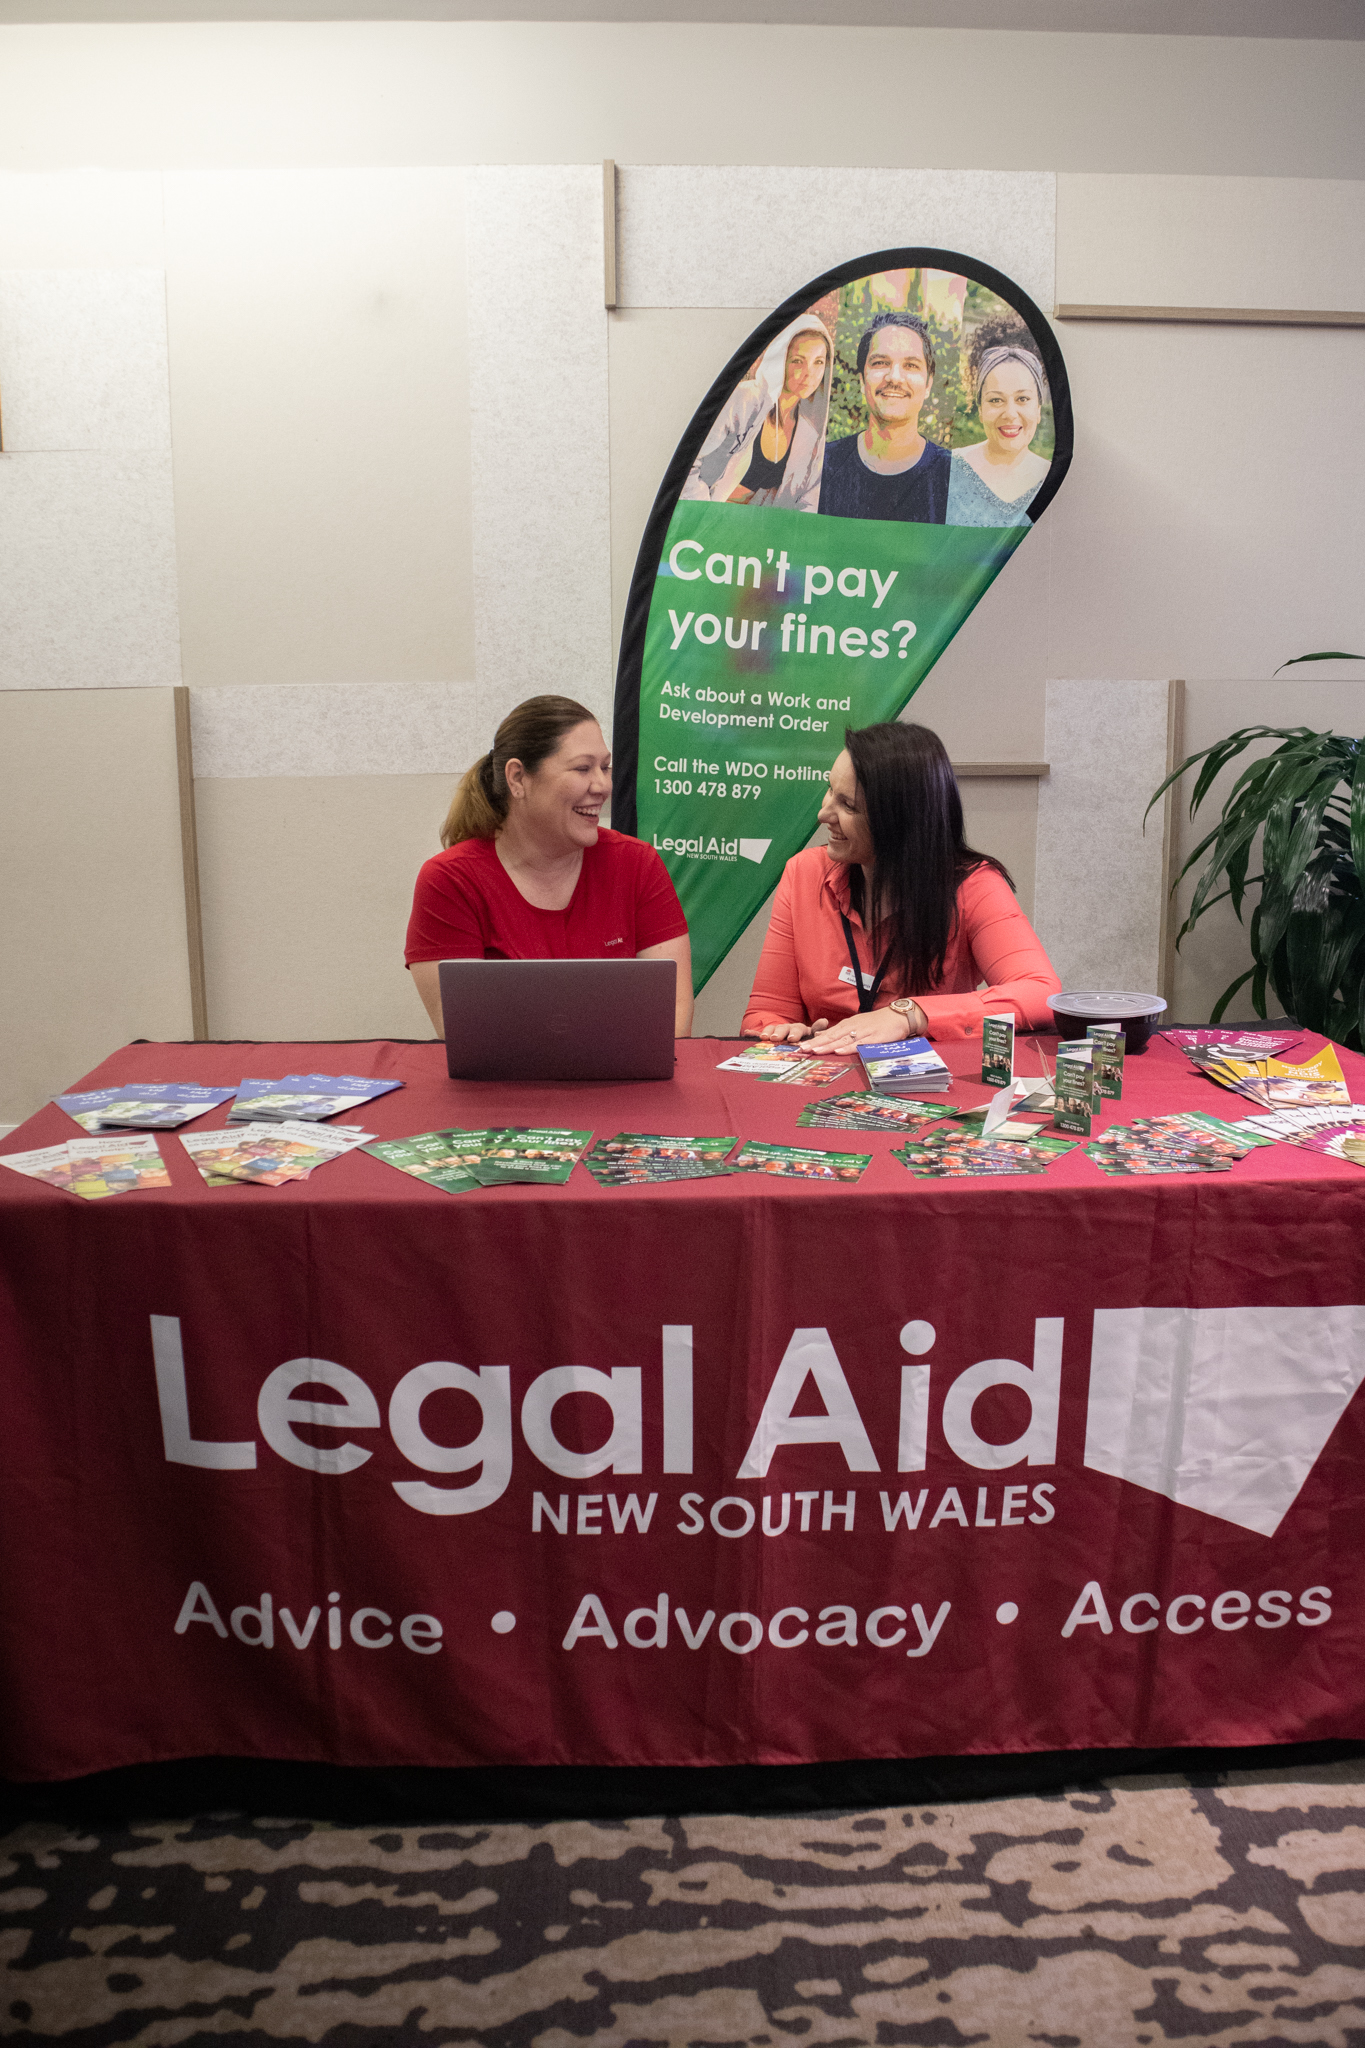 Two people at legal aid stall